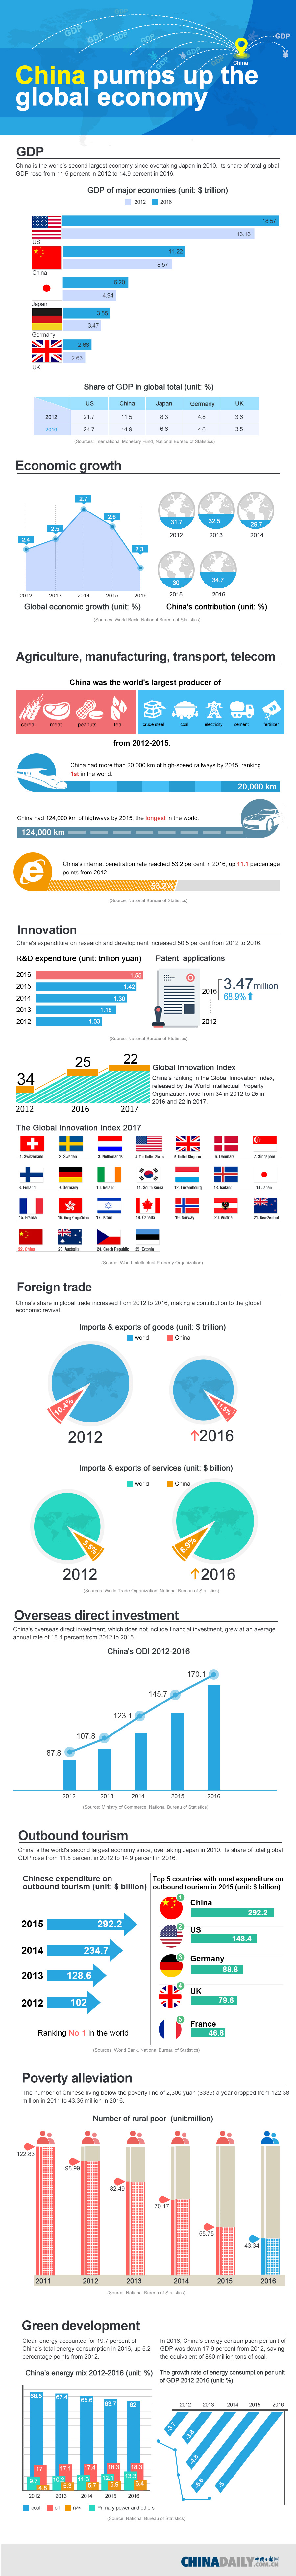 Infographic: China pumps up the global economy